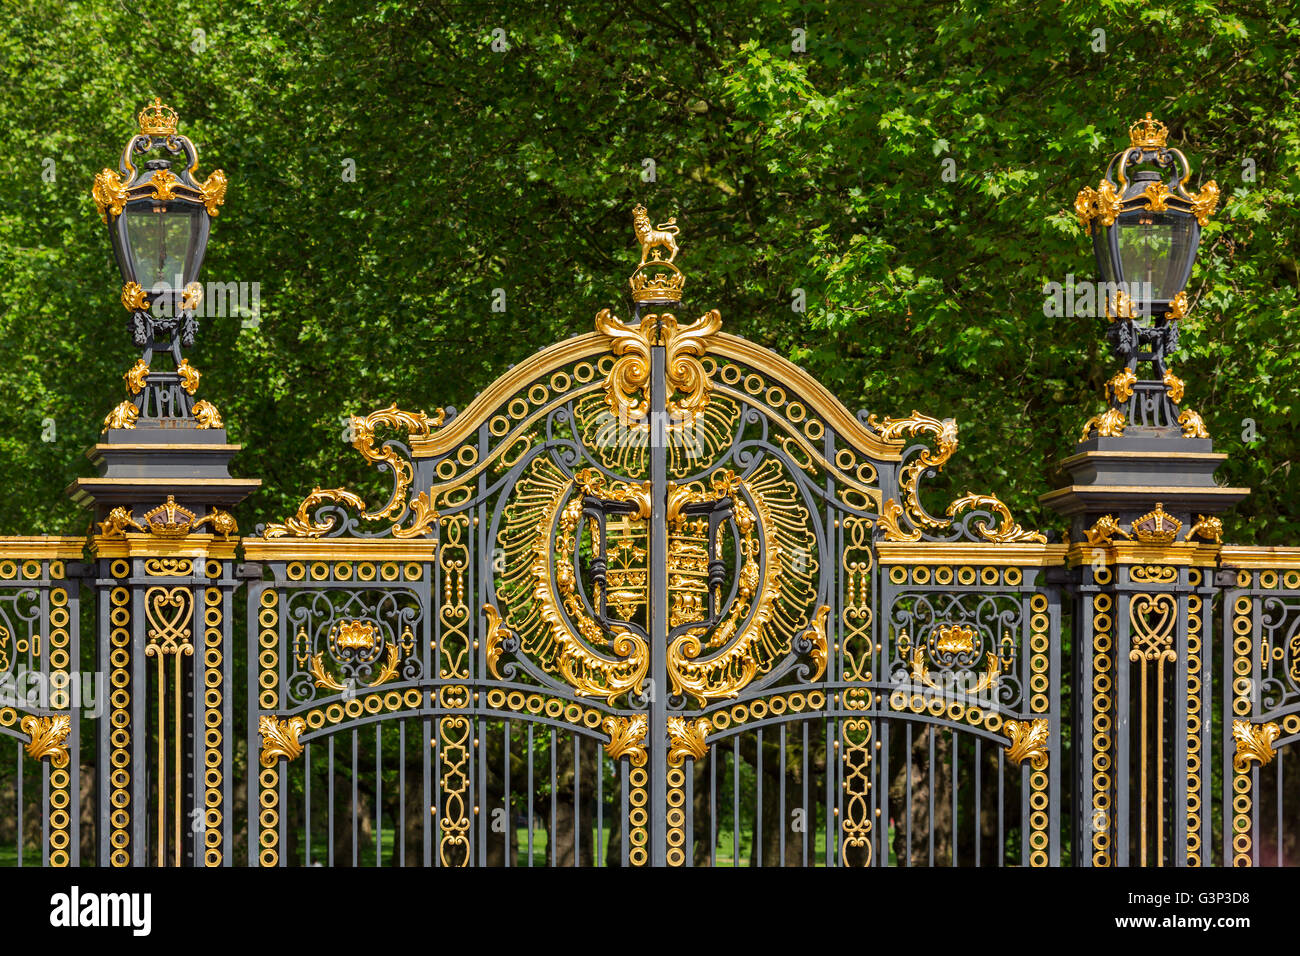 Royal gate at Buckingham during a sunny day Stock Photo